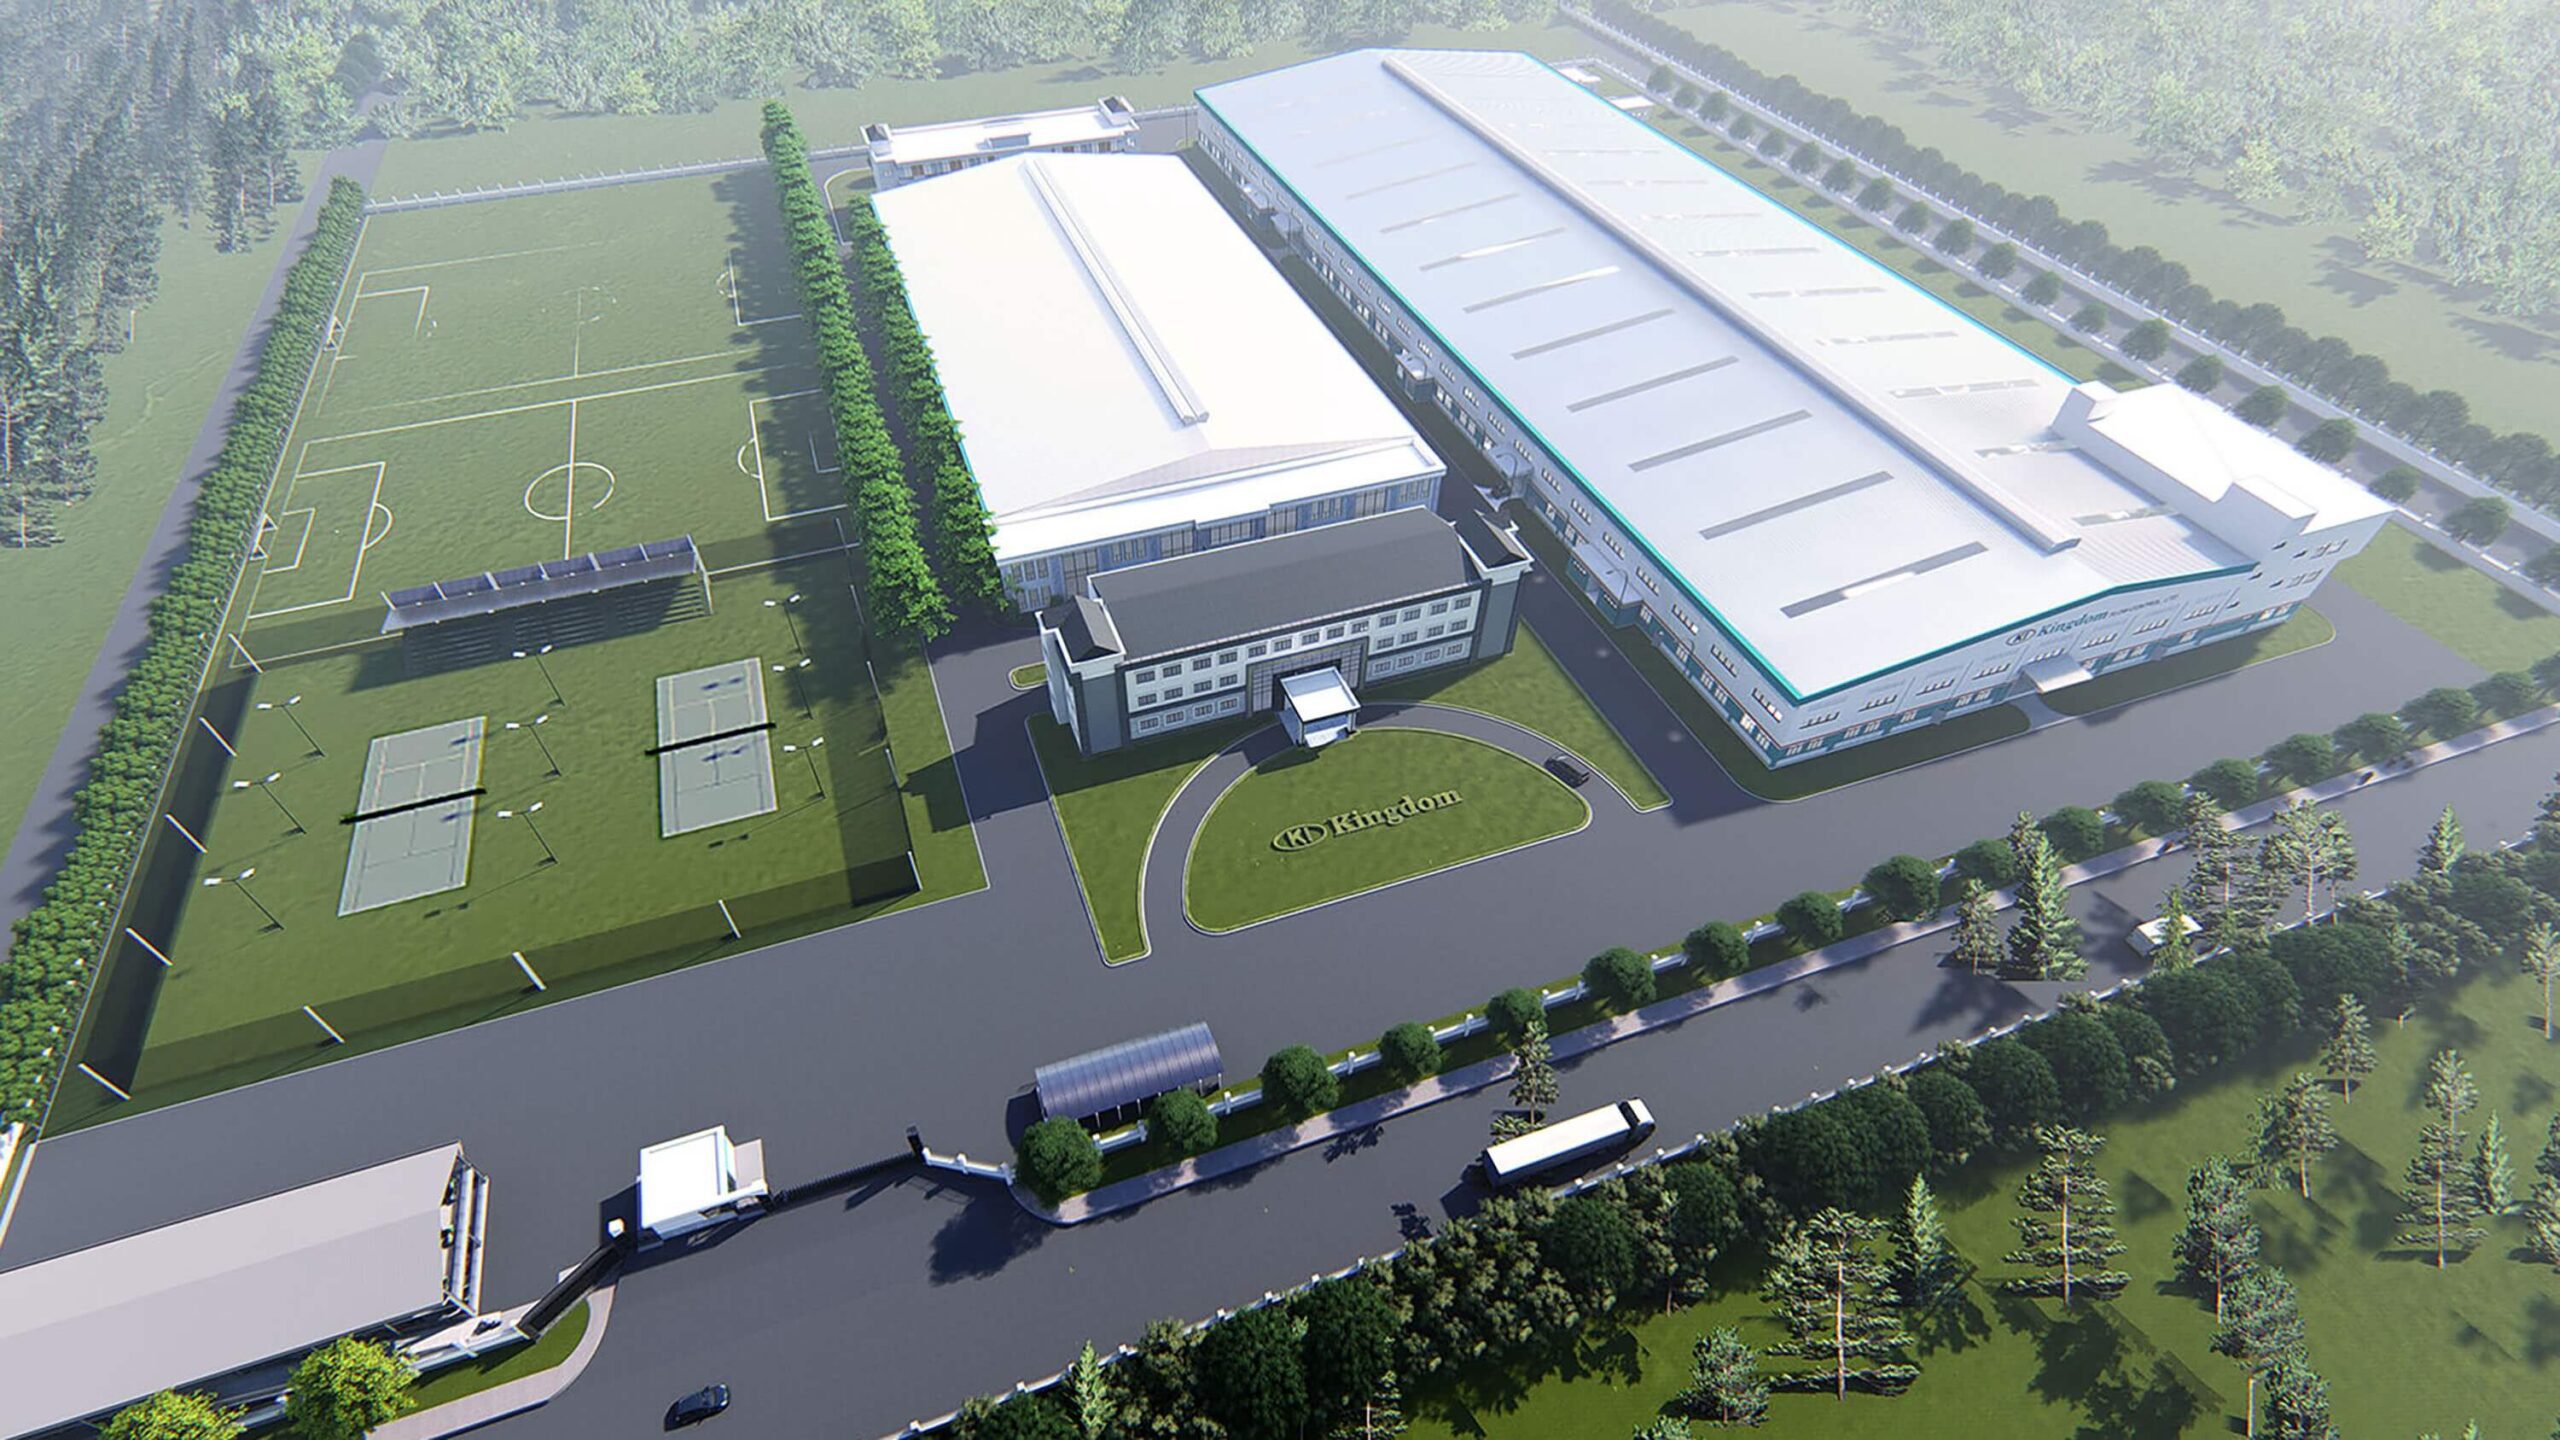 71,000sqm (land space) new-built plant in Vietnam.